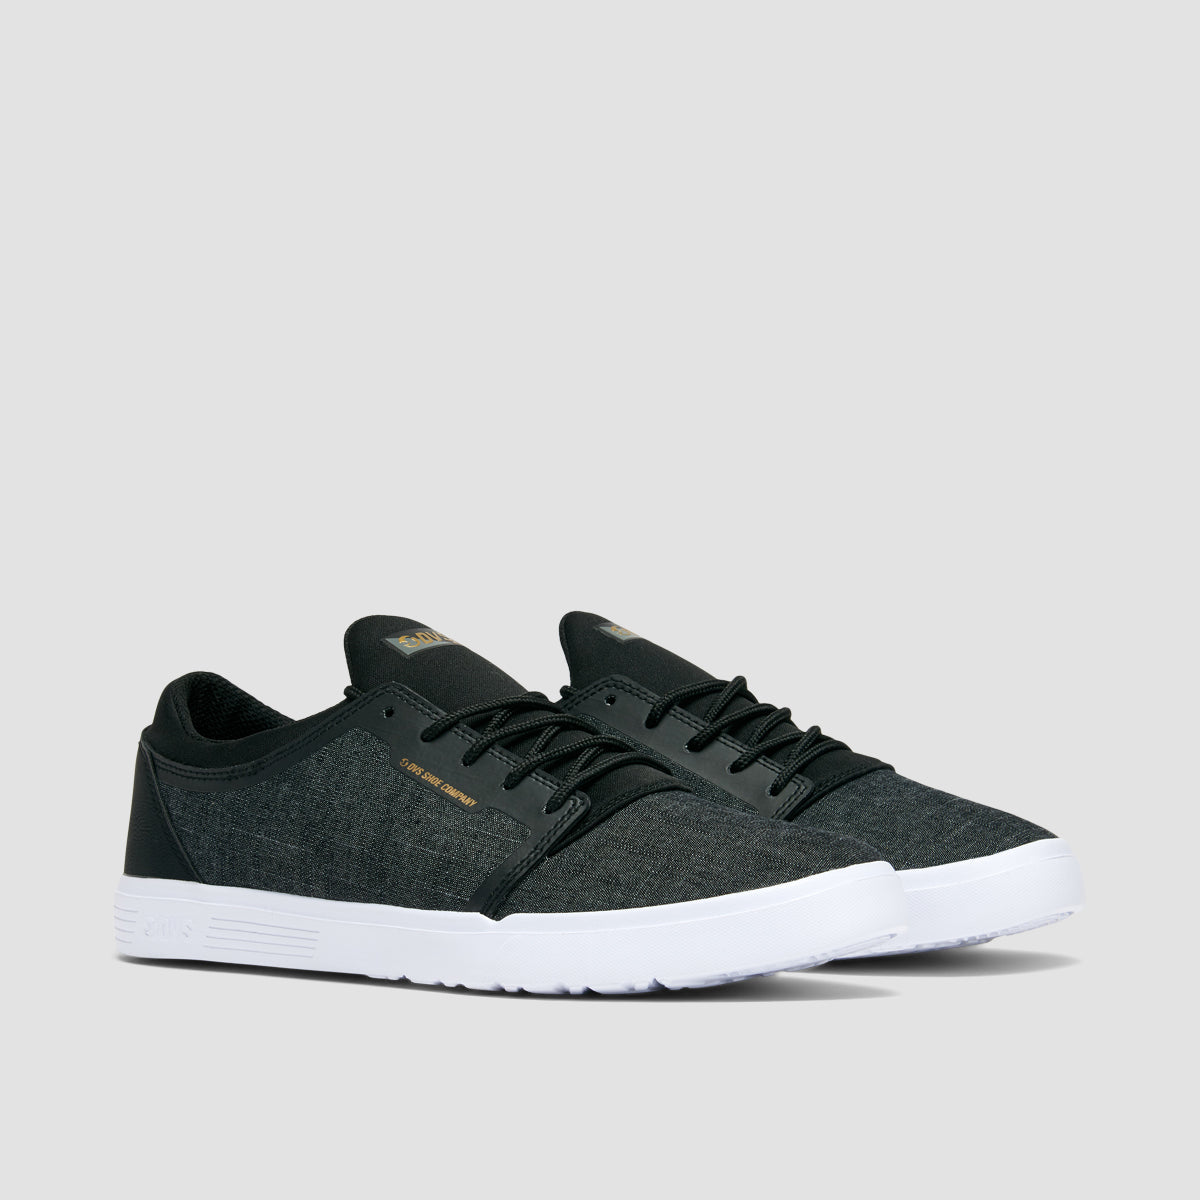 DVS Stratos LT+ Shoes - Black/Gold/Chambray